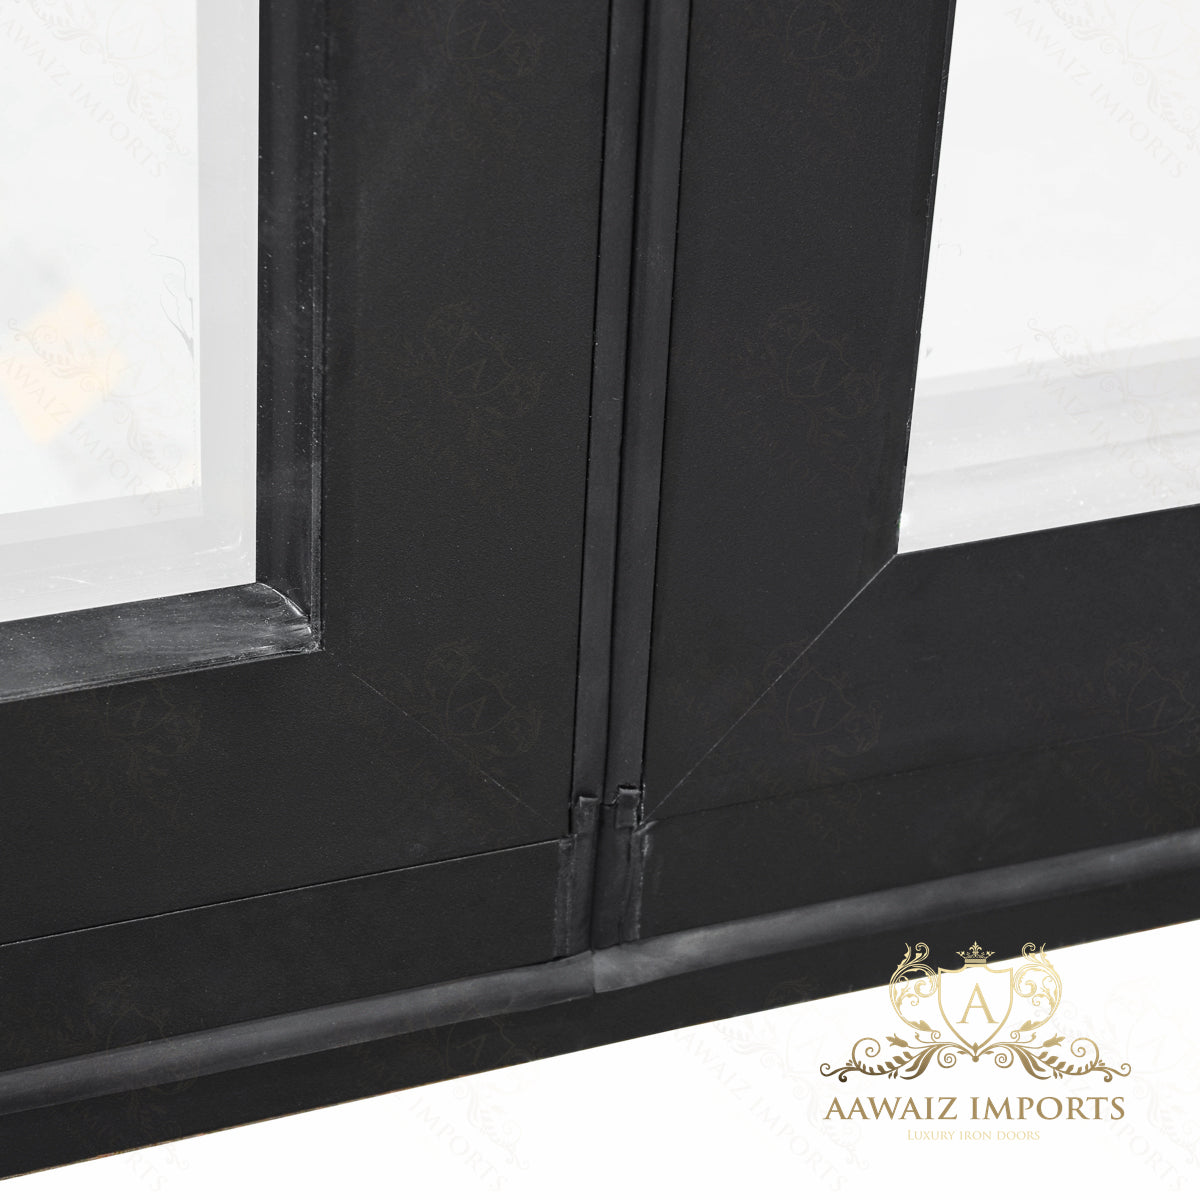 8 Ft Wide By 9 Ft Tall (96" By 108") Aluminum Bi Fold Patio Door  Outswing  Thermal Break Insulated Matt Black Finish